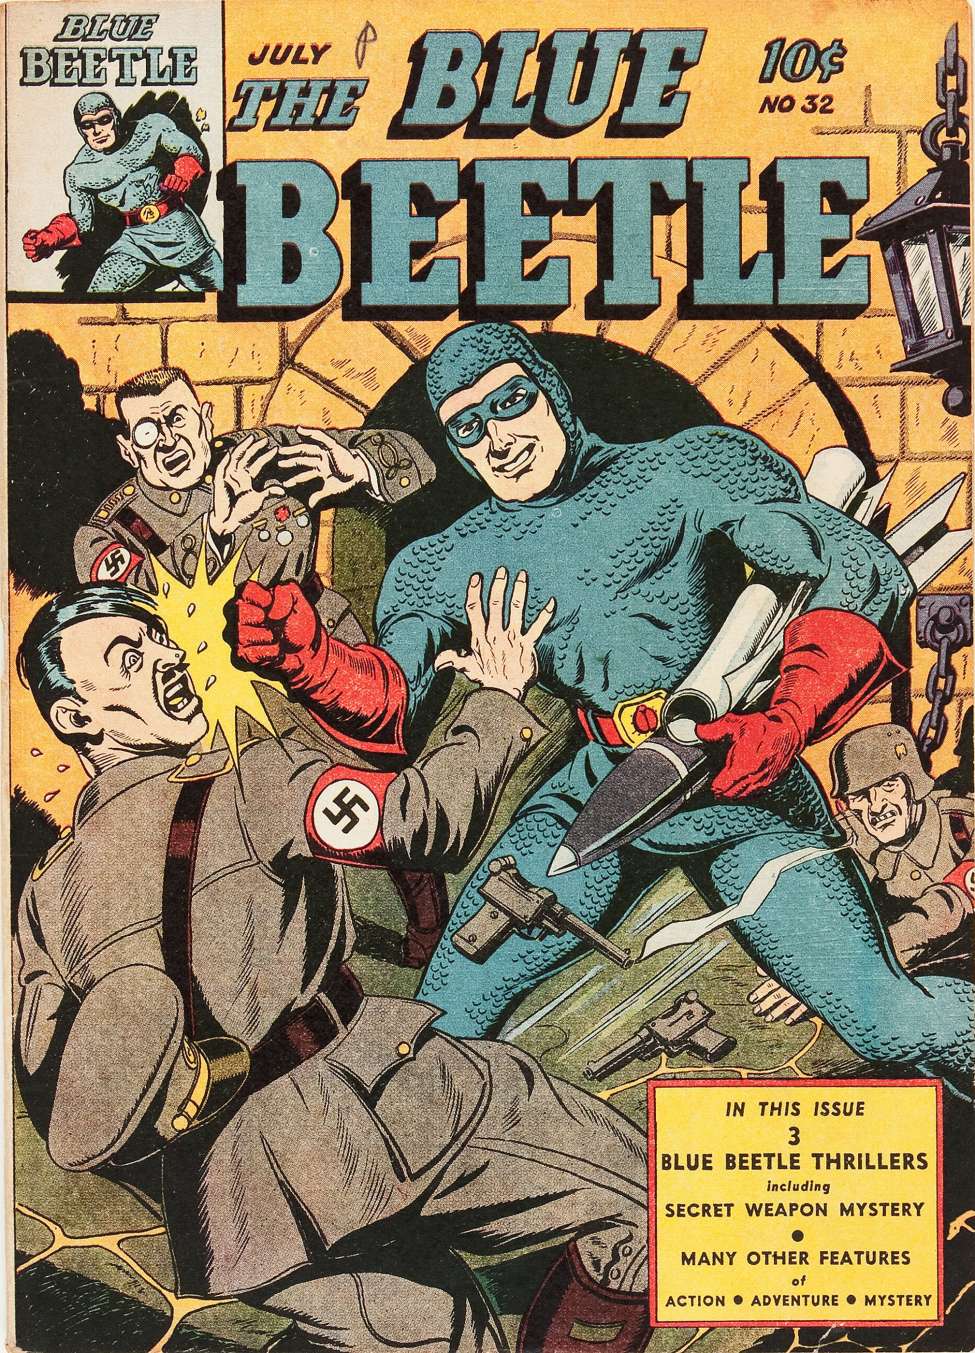 Book Cover For Blue Beetle 32 - Version 2